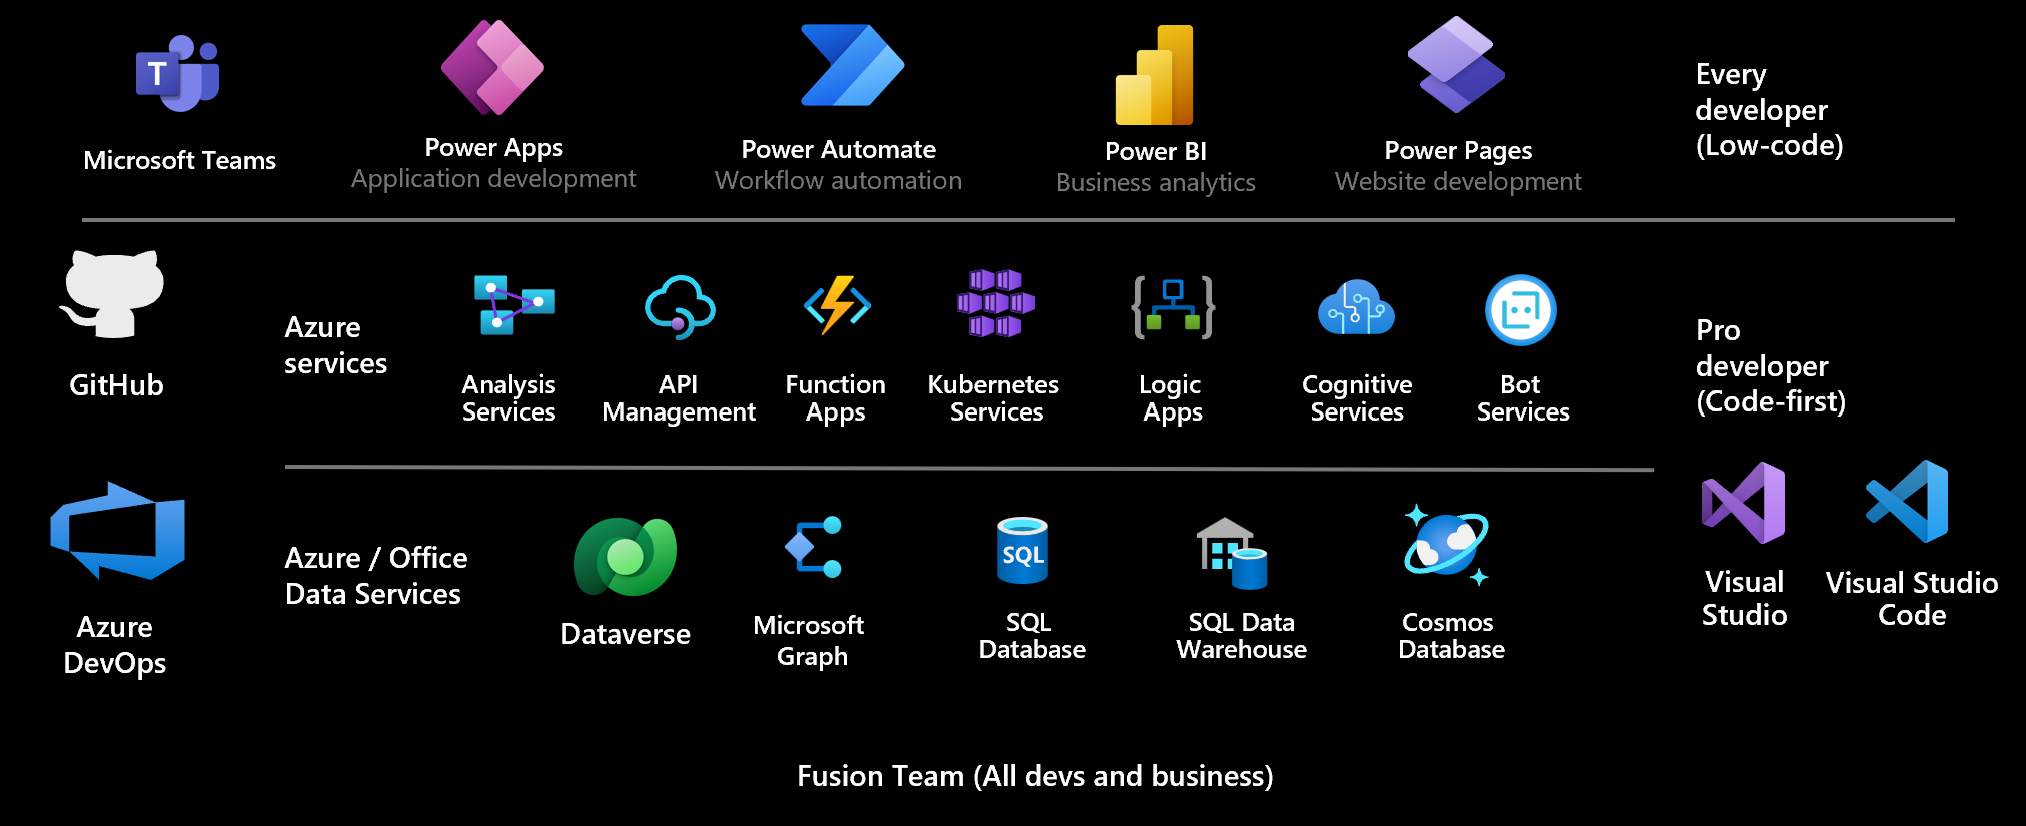 Picture of Microsoft Power Platform tools.